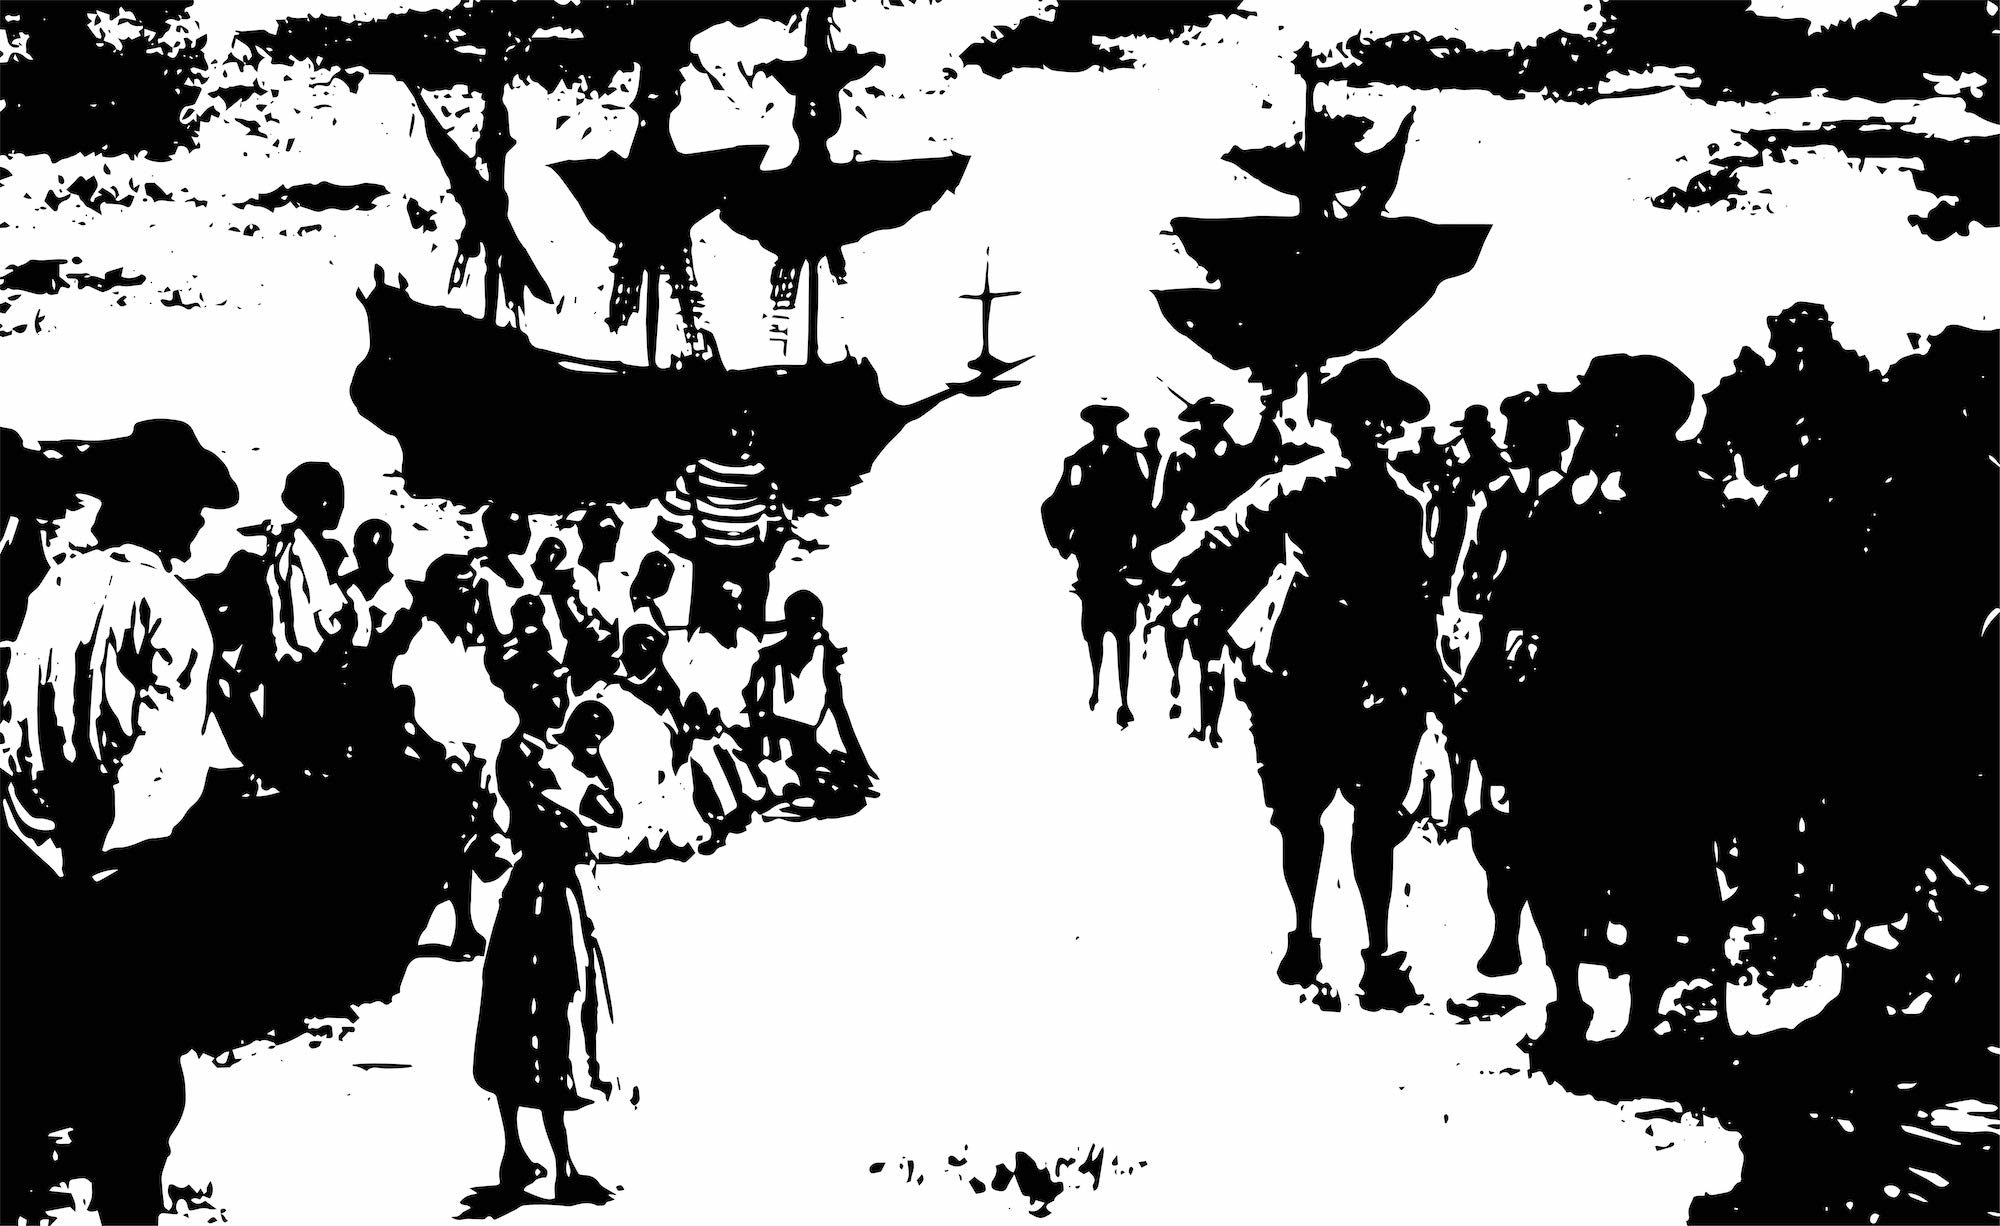 Engraving shows the arrival of a Dutch slave ship with a group of African slaves for sale, Jamestown, Virginia, 1619. (Hulton Archive/Getty Images)